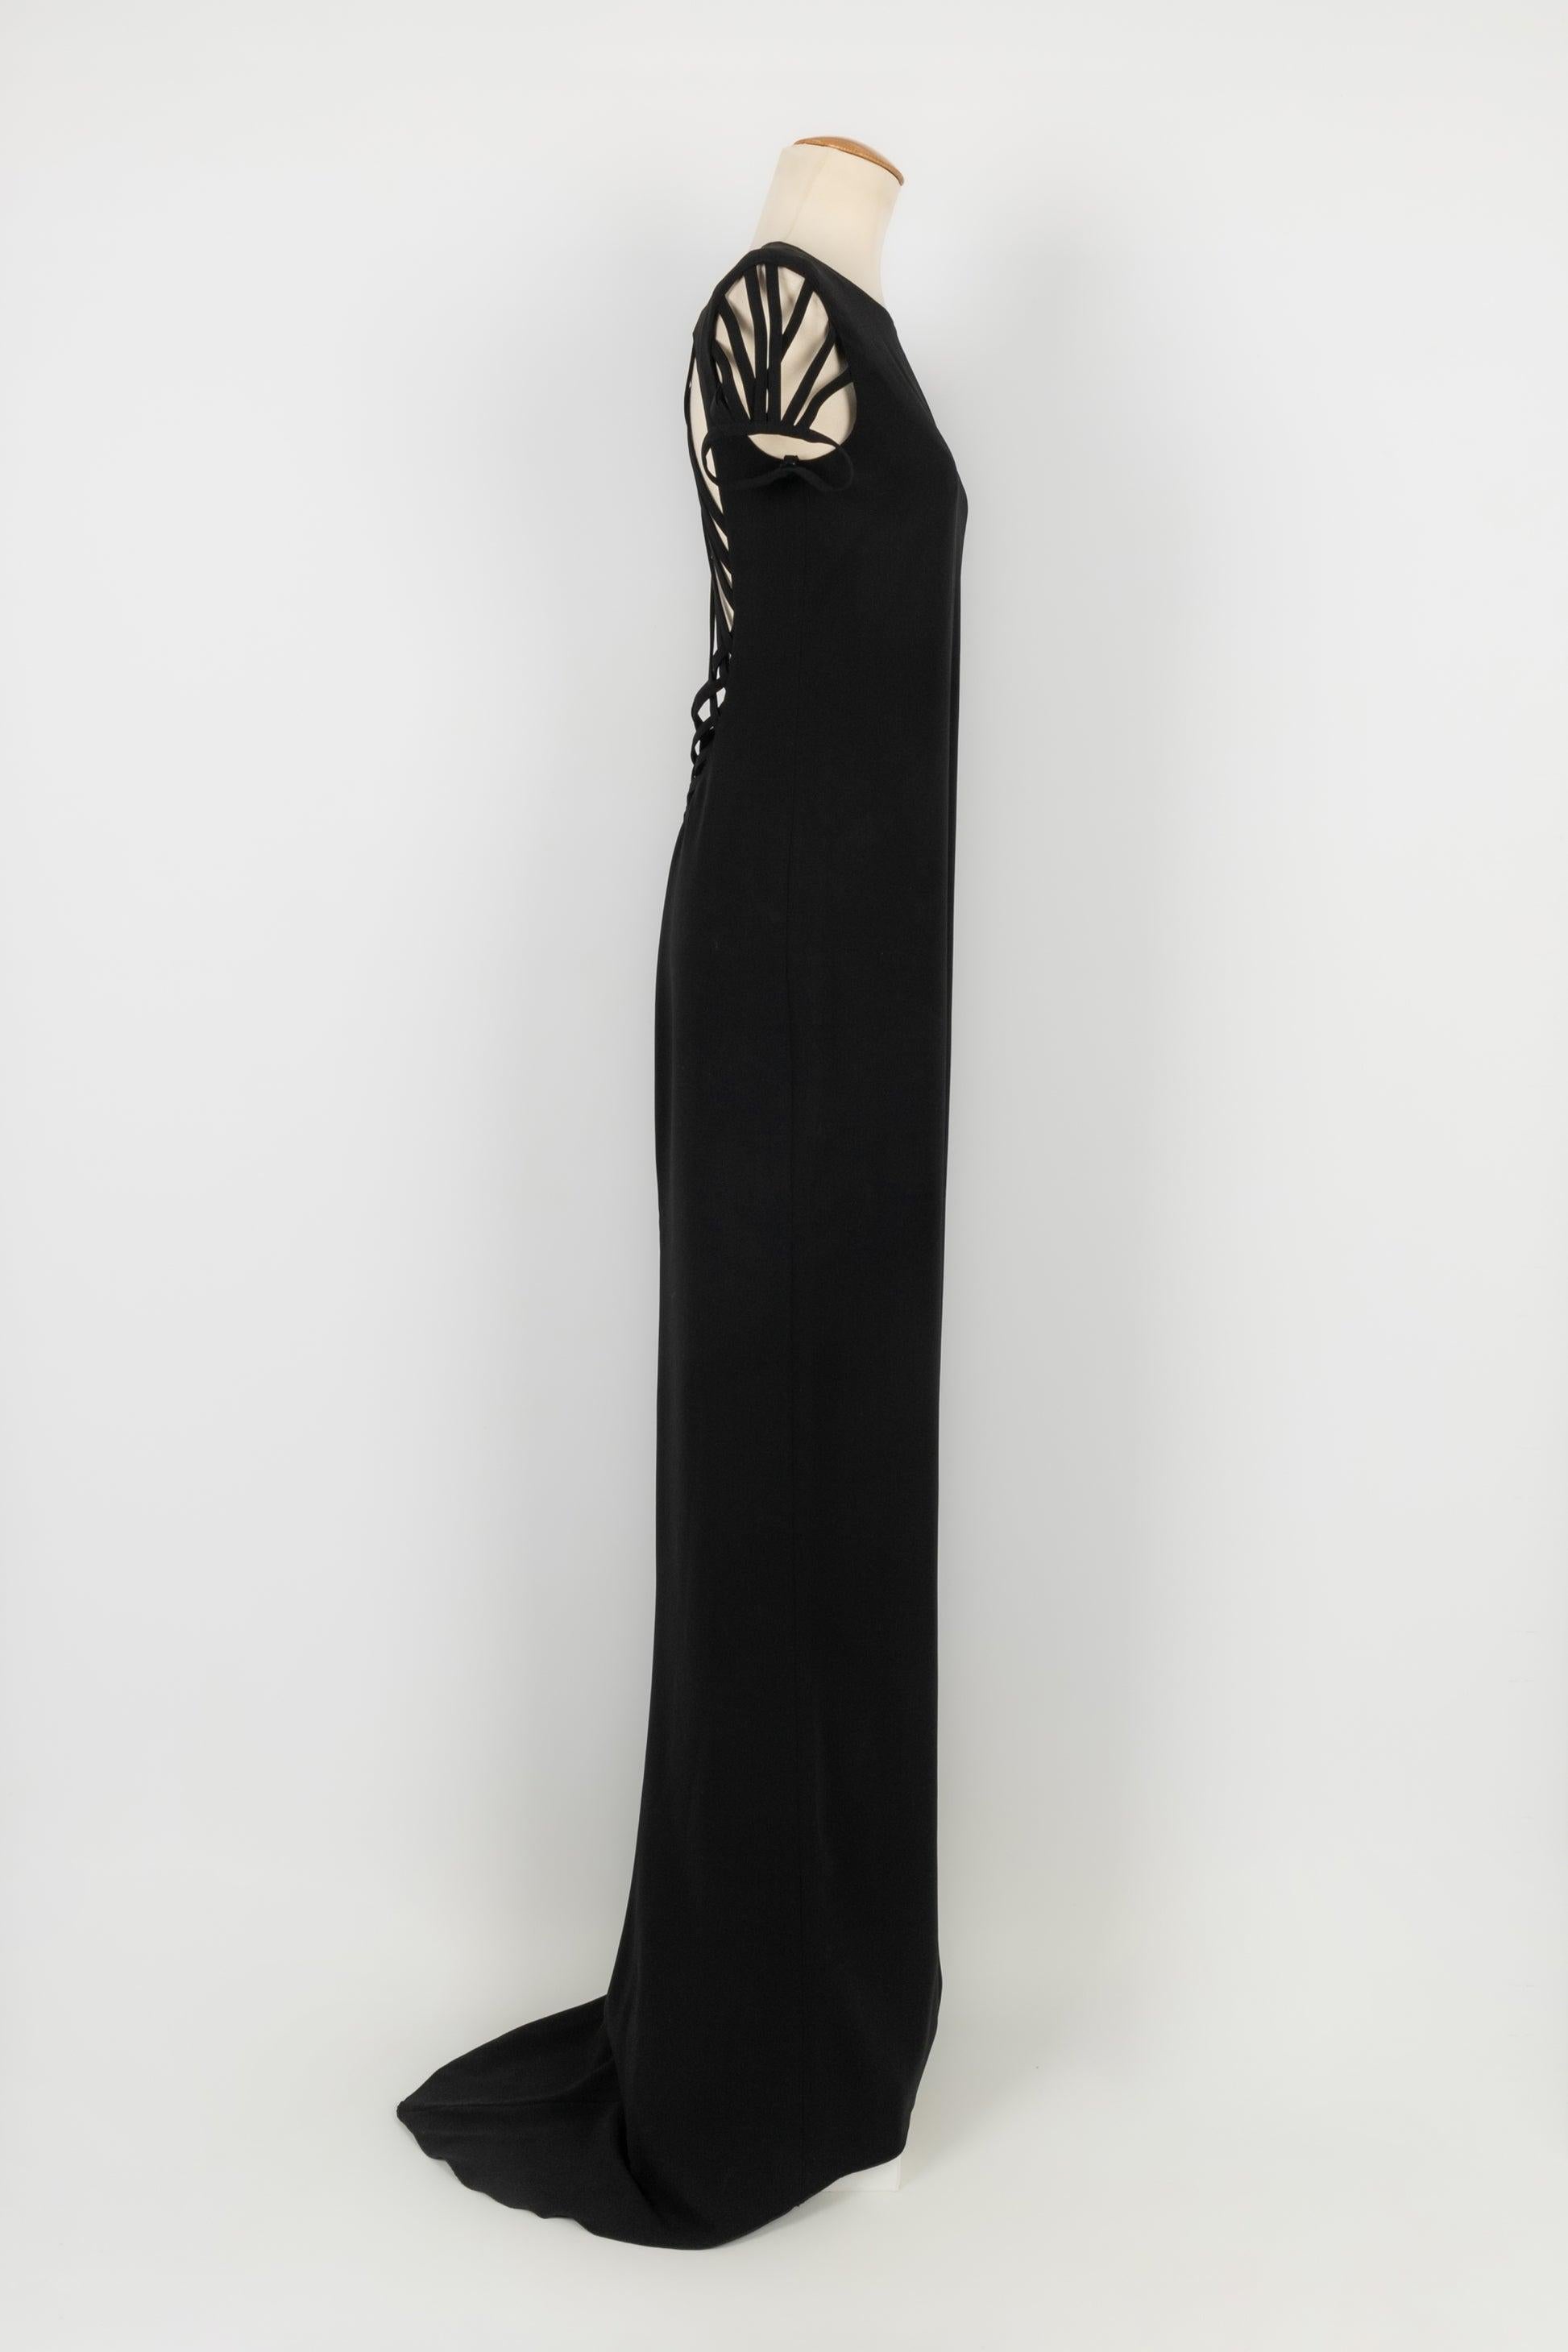 Jean Paul Gaultier - Black long dress with openwork on the back. Indicated size 36FR. 2011 Resort Collection.

Additional information:
Condition: Very good condition
Dimensions: Shoulder width: 36 cm
Chest: 44 cm
Waist: 37 cm
Hips: 45 cm
Length: 168